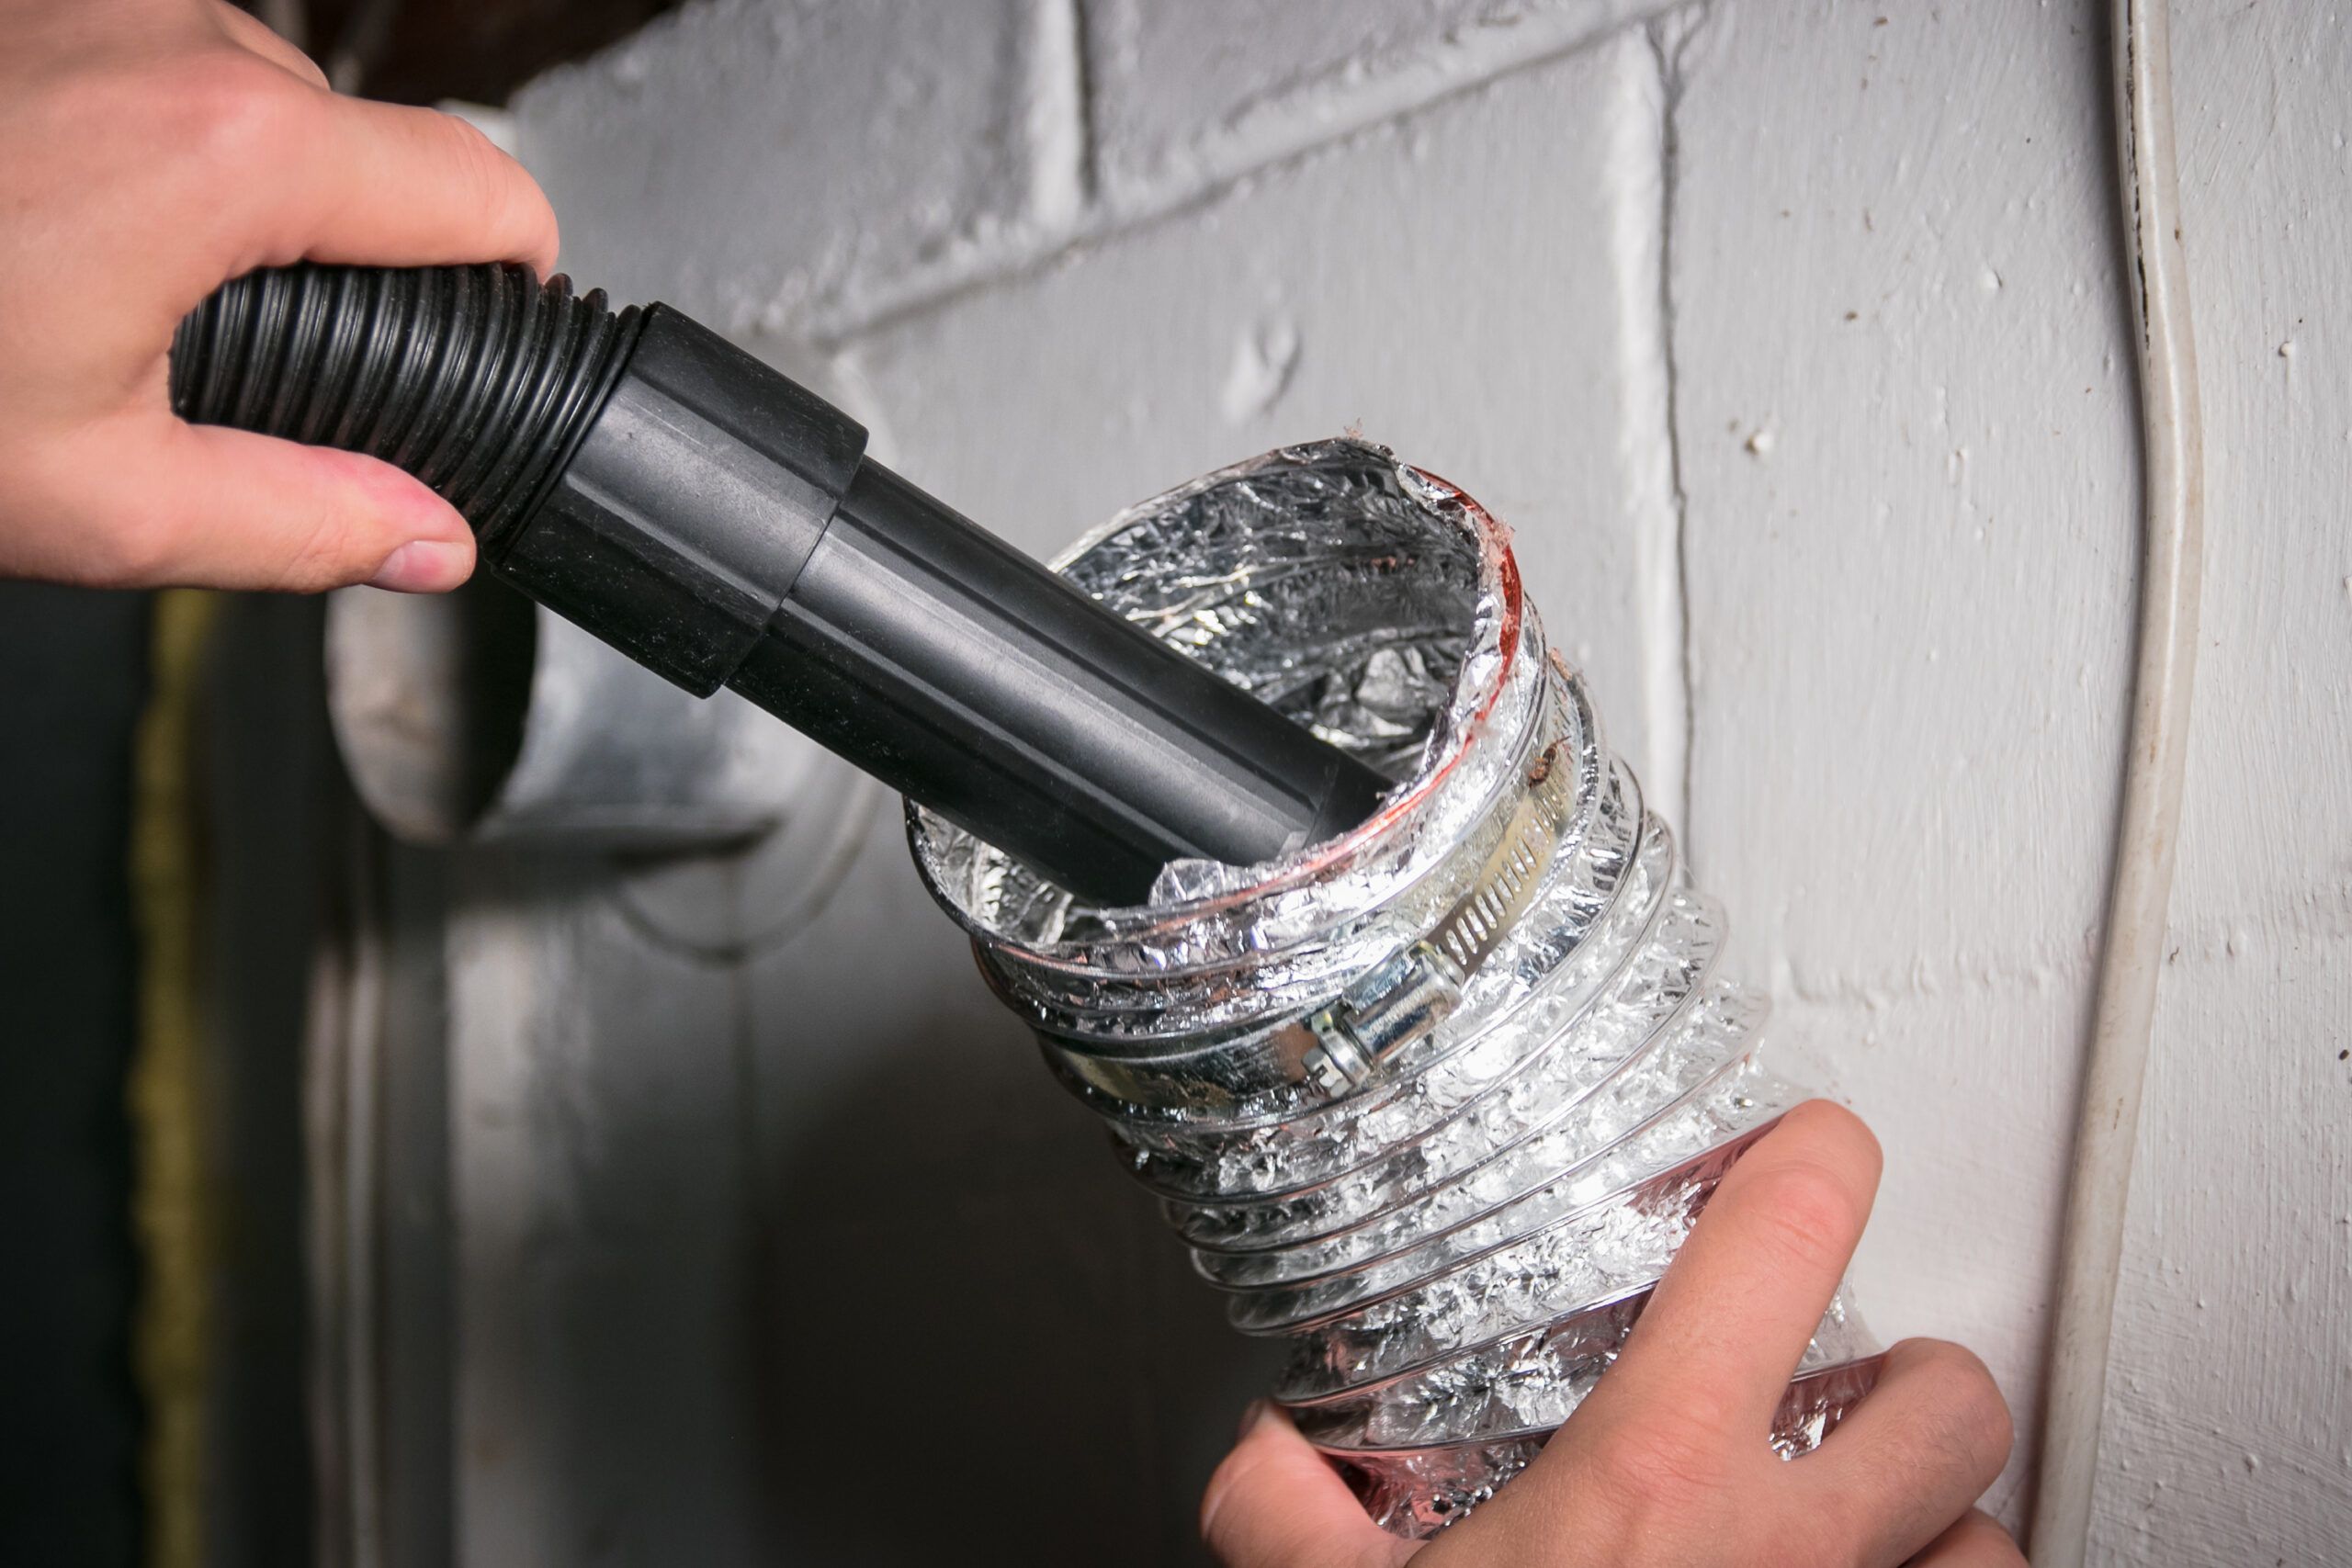 Dryer vent cleaning company palm beach county